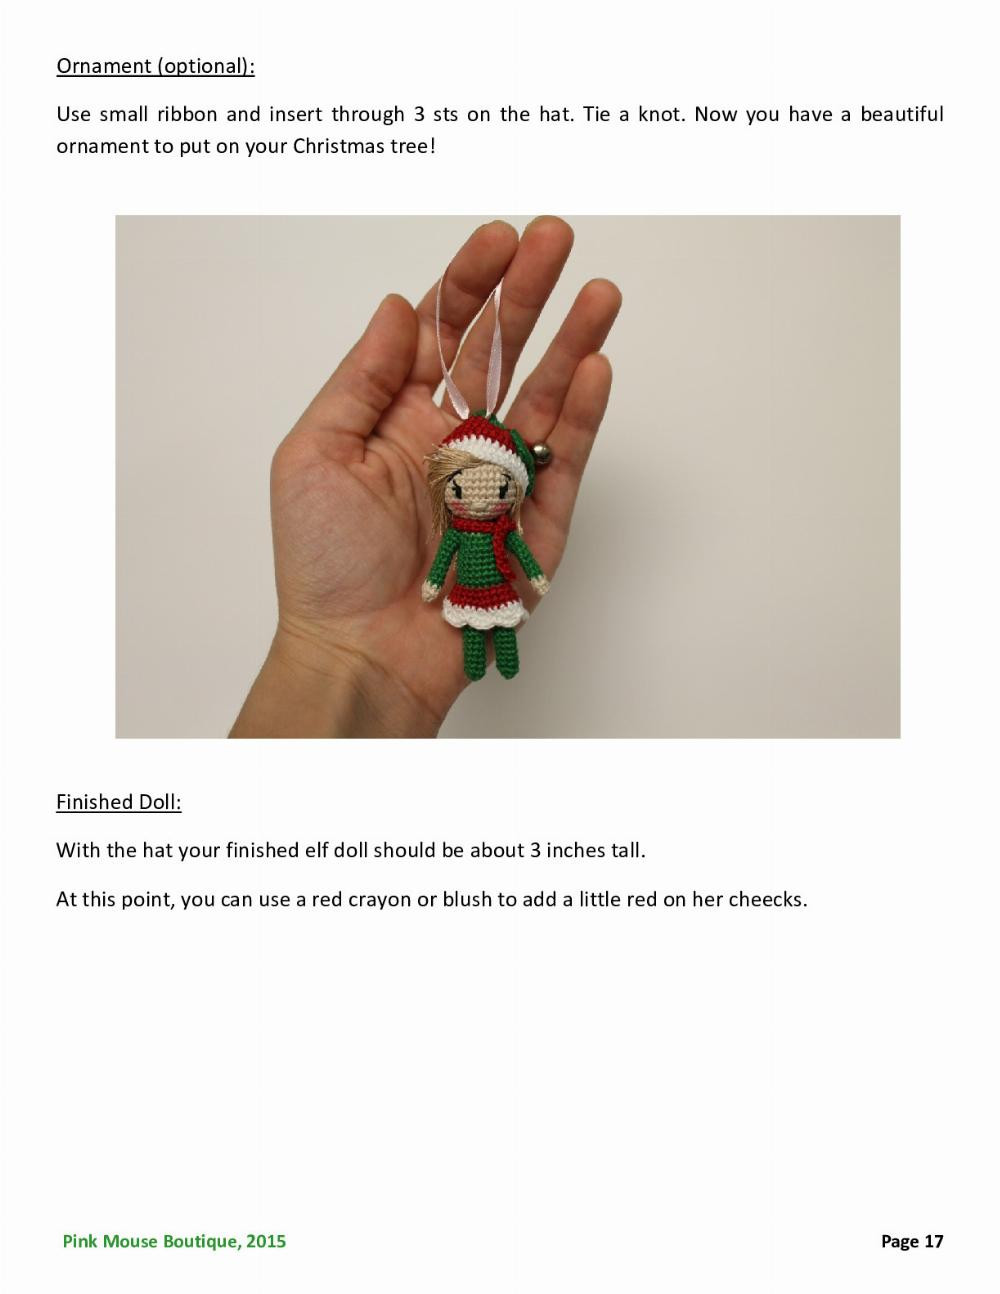 Christmas Elf Ornament PATTERN BY DIANA MOORE AT PINK MOUSE BOUTIQUE